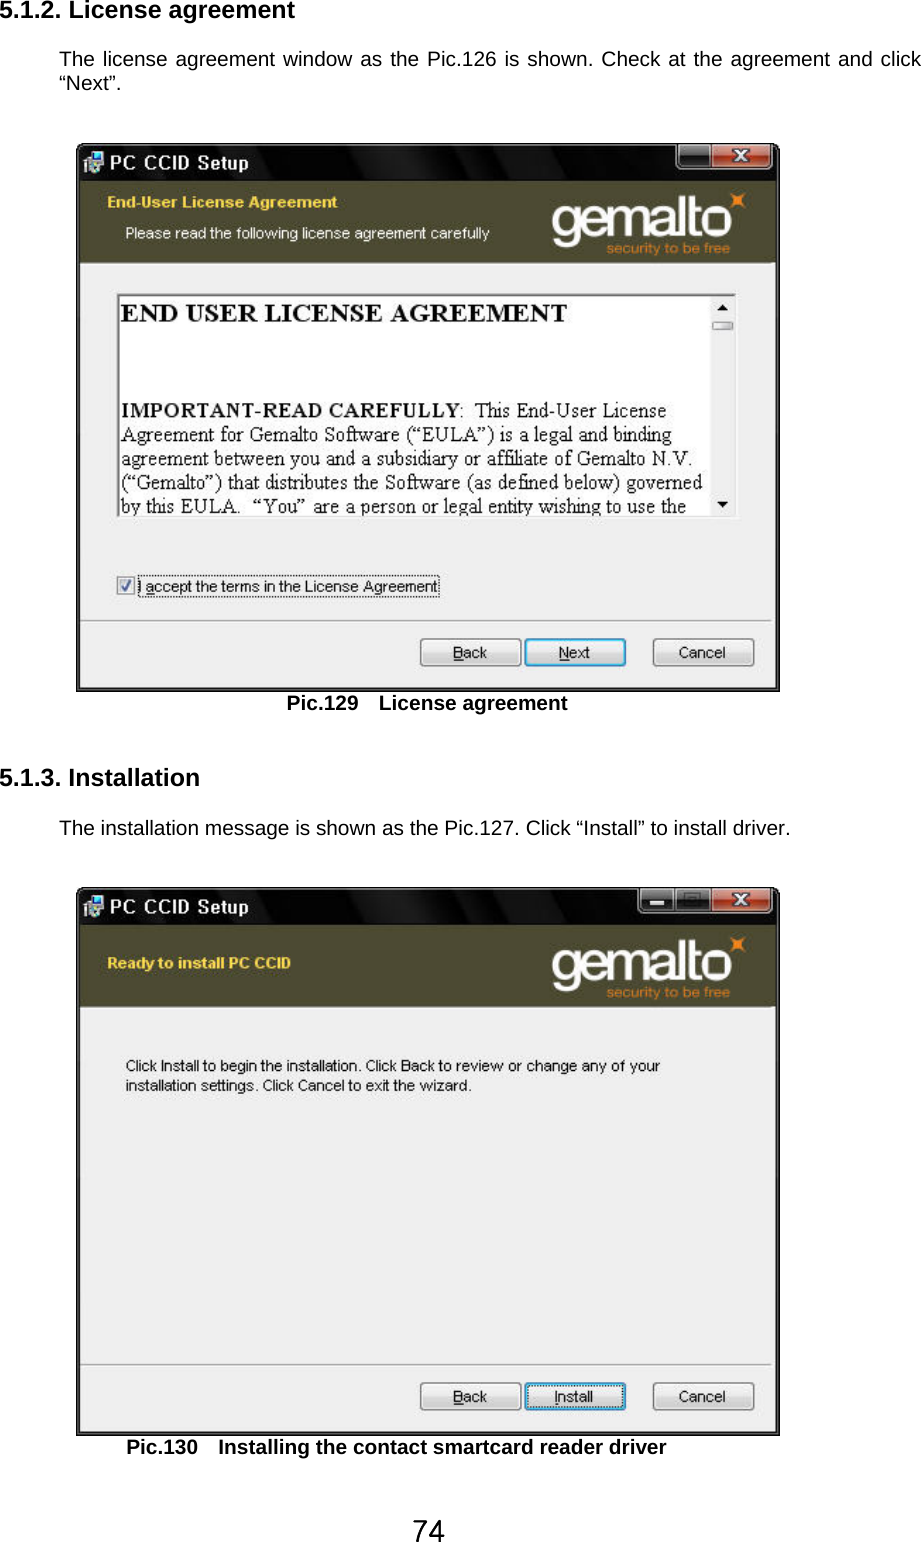 74 5.1.2. License agreement  The license agreement window as the Pic.126 is shown. Check at the agreement and click “Next”.    Pic.129  License agreement   5.1.3. Installation  The installation message is shown as the Pic.127. Click “Install” to install driver.    Pic.130    Installing the contact smartcard reader driver  